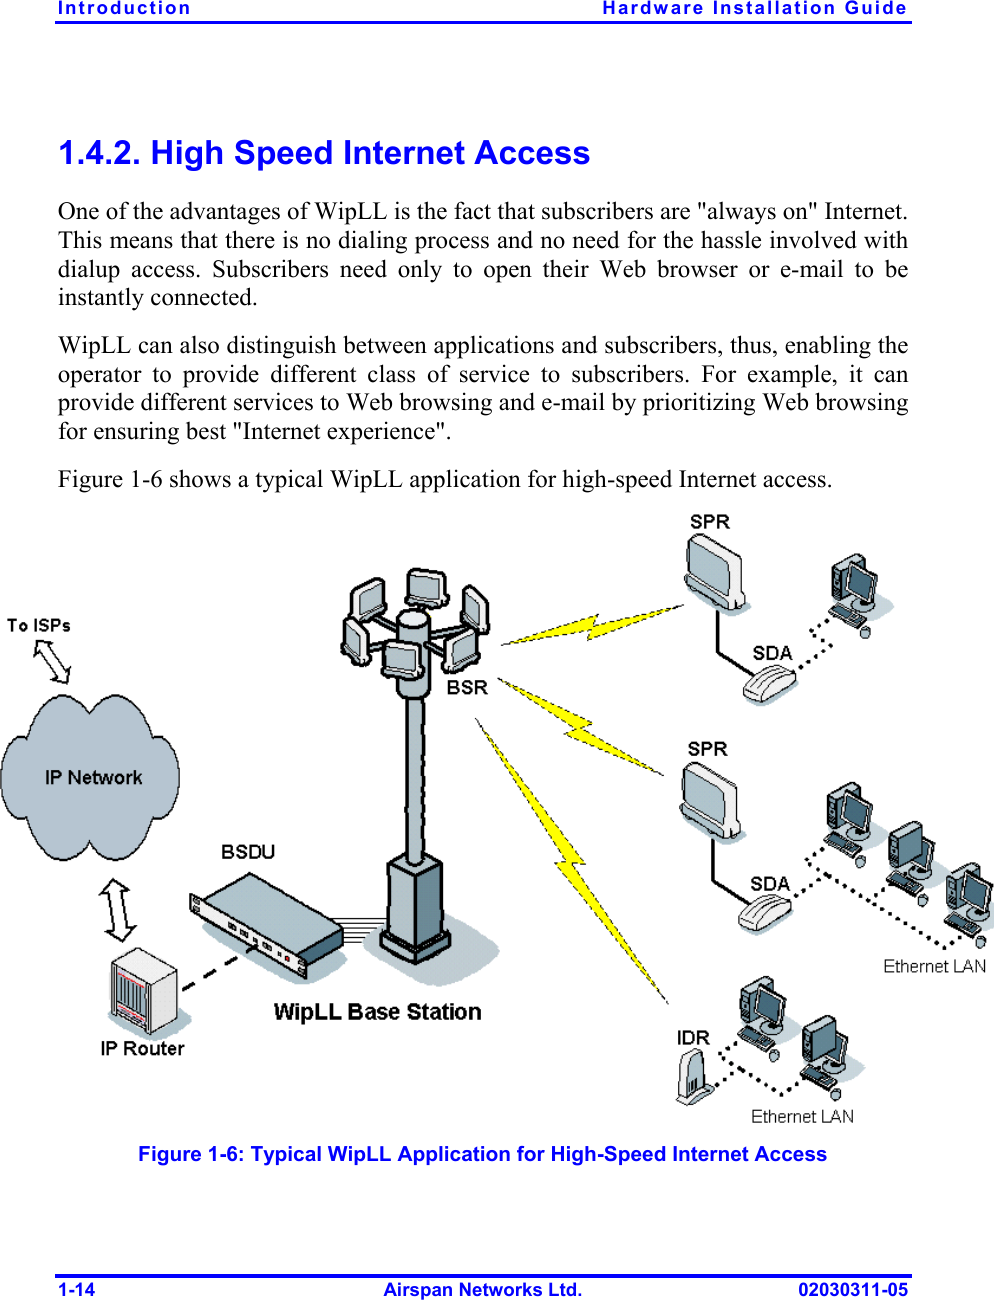 Introduction  Hardware Installation Guide 1-14  Airspan Networks Ltd.  02030311-05 1.4.2. High Speed Internet Access One of the advantages of WipLL is the fact that subscribers are &quot;always on&quot; Internet. This means that there is no dialing process and no need for the hassle involved with dialup access. Subscribers need only to open their Web browser or e-mail to be instantly connected. WipLL can also distinguish between applications and subscribers, thus, enabling the operator to provide different class of service to subscribers. For example, it can provide different services to Web browsing and e-mail by prioritizing Web browsing for ensuring best &quot;Internet experience&quot;. Figure  1-6 shows a typical WipLL application for high-speed Internet access.  Figure  1-6: Typical WipLL Application for High-Speed Internet Access 